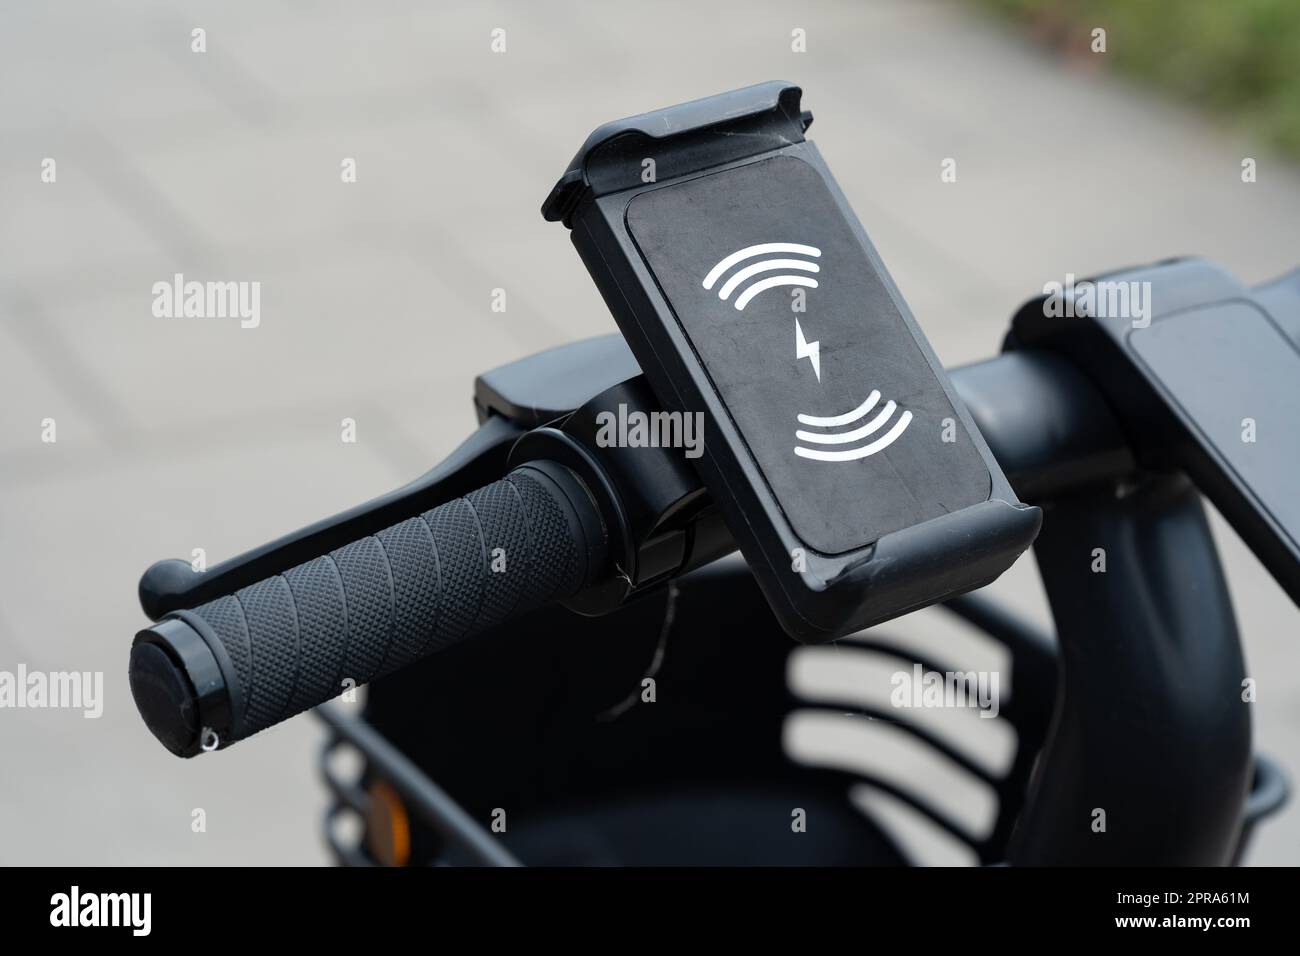 Place for a smartphone, mobile phone on an electric scooter, phone holder on an electric vehicle, city urban area, mobility as a service simple concep Stock Photo